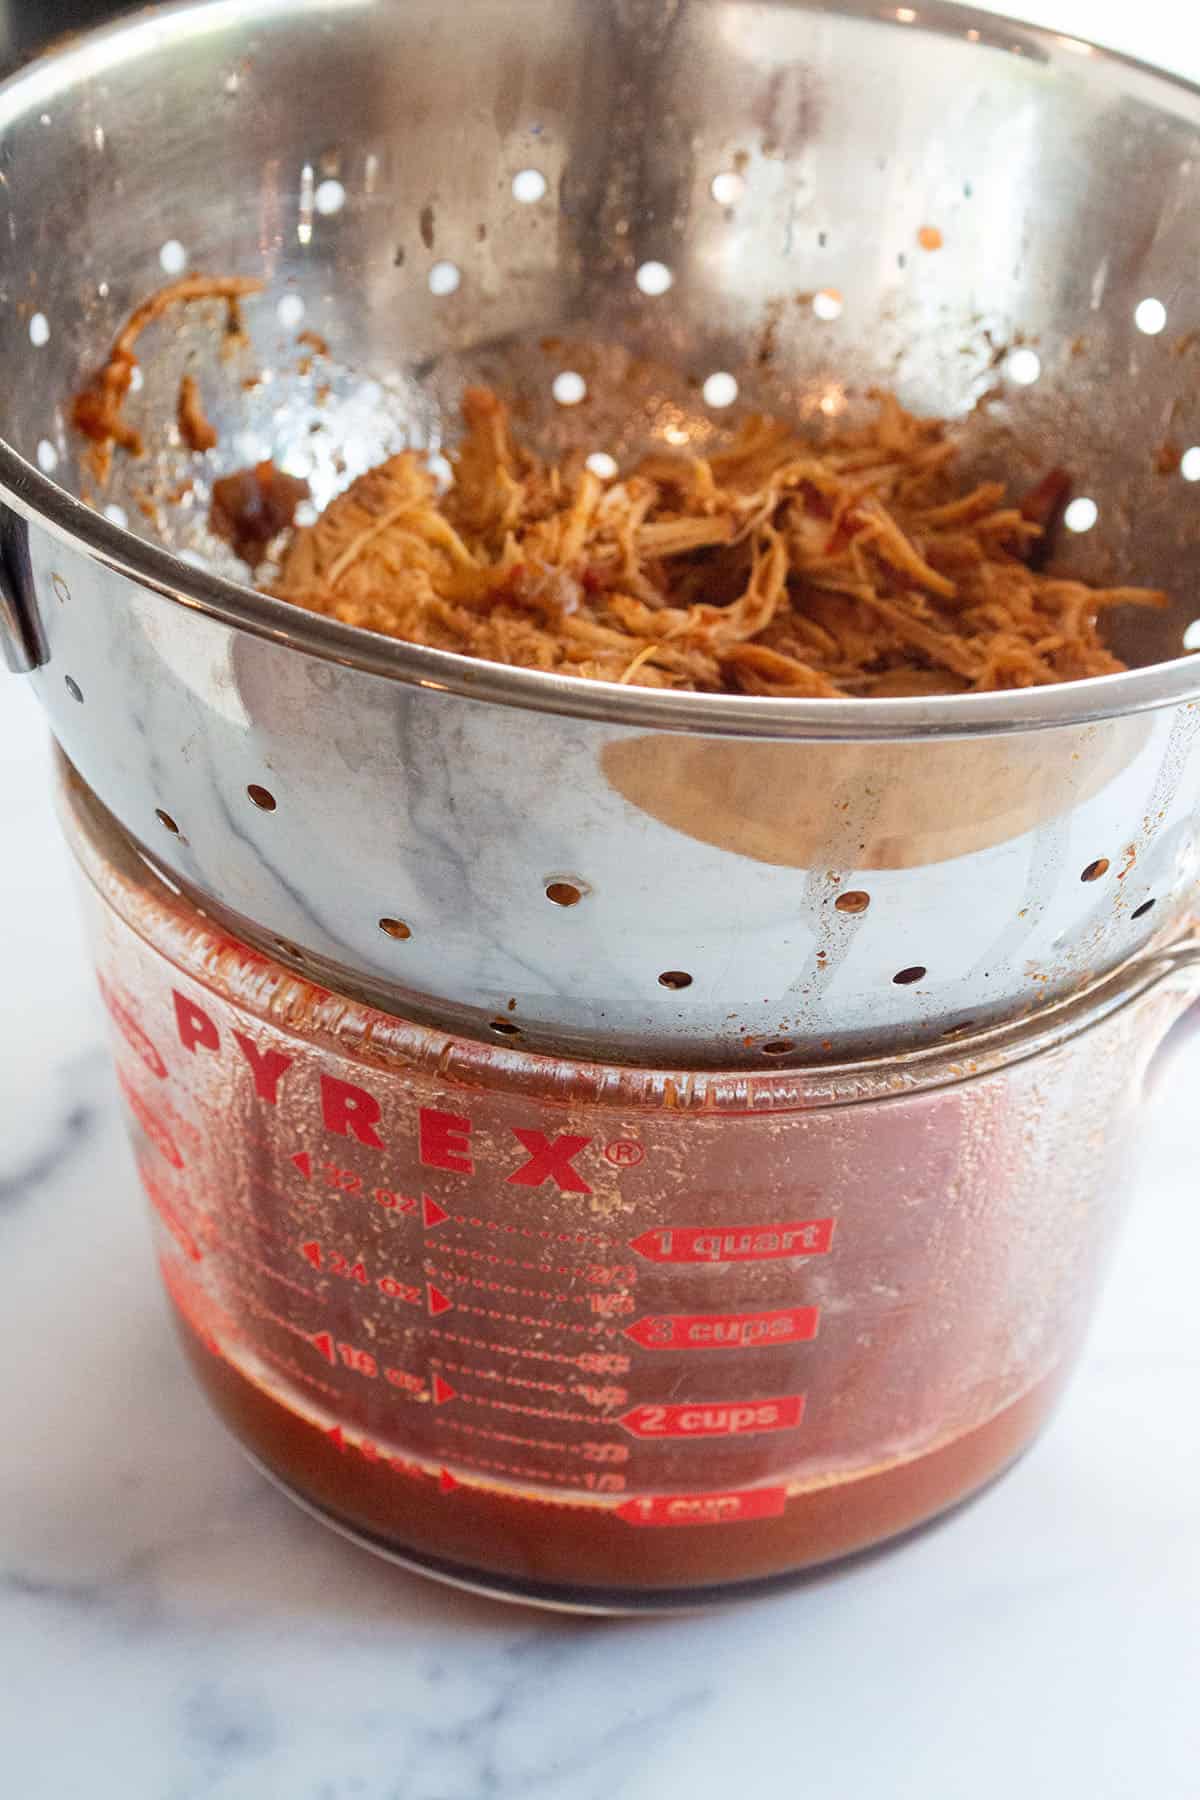 A pyrex glass liquid measuring cup with a strainer on top separating chicken from the juice.